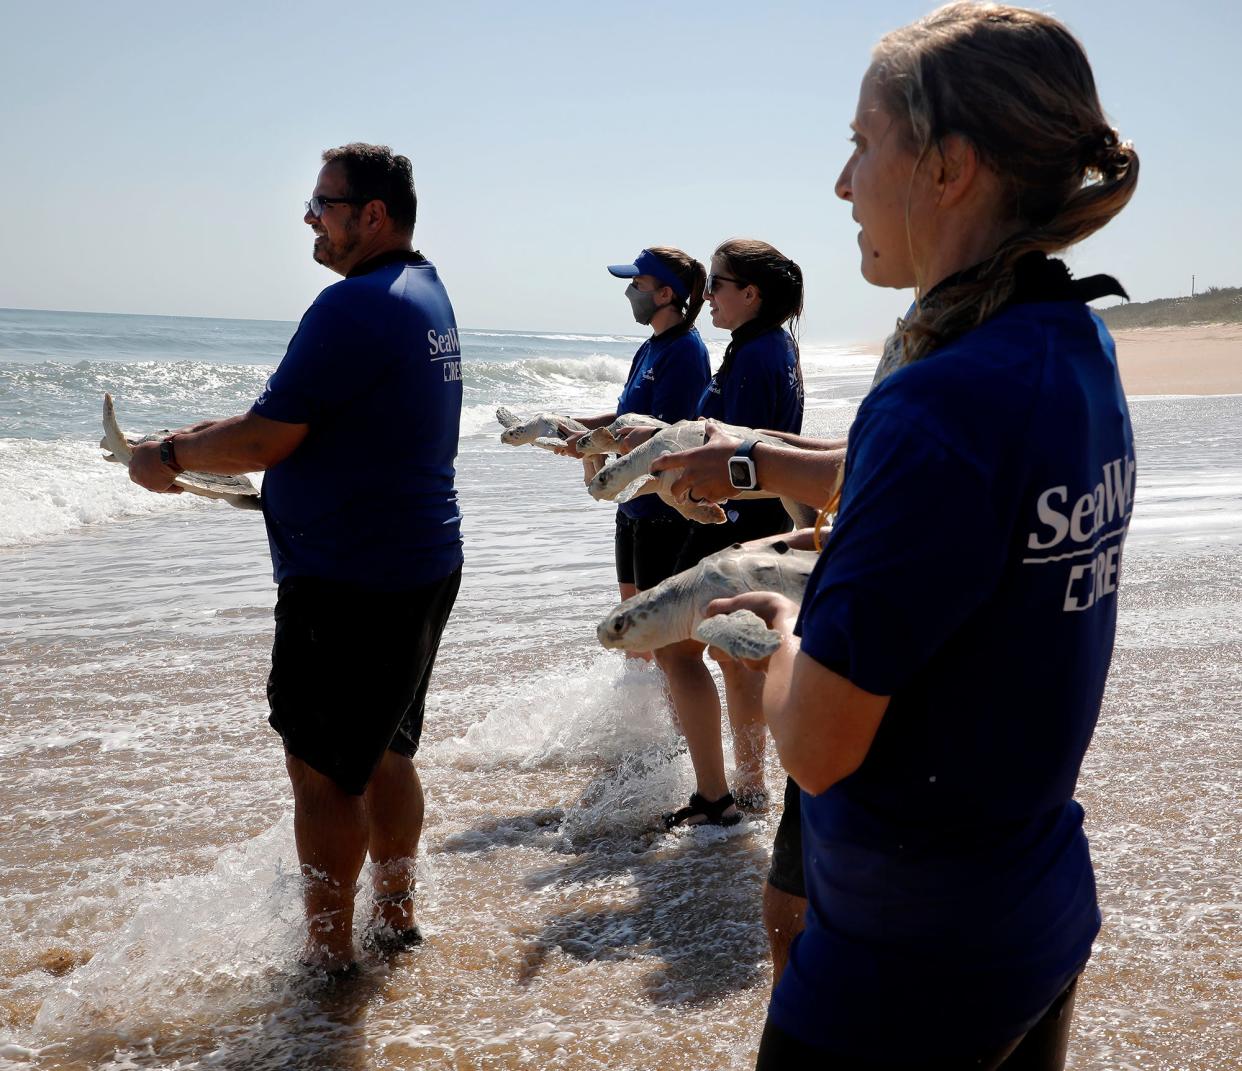 SeaWorld Rescue Team releases 10 Kemp's ridley sea turtles into the ocean at Canaveral National Seashore on Friday, March 4, 2022, in New Smyrna Beach. The sea turtles were rescued in Cape Cod, Massachusetts and rehabilitated by the SeaWorld Orlando Rescue Team for three months. Kemp's ridley are the most endangered sea turtle species, said SeaWorld animal care specialist Nicholas Ricci.